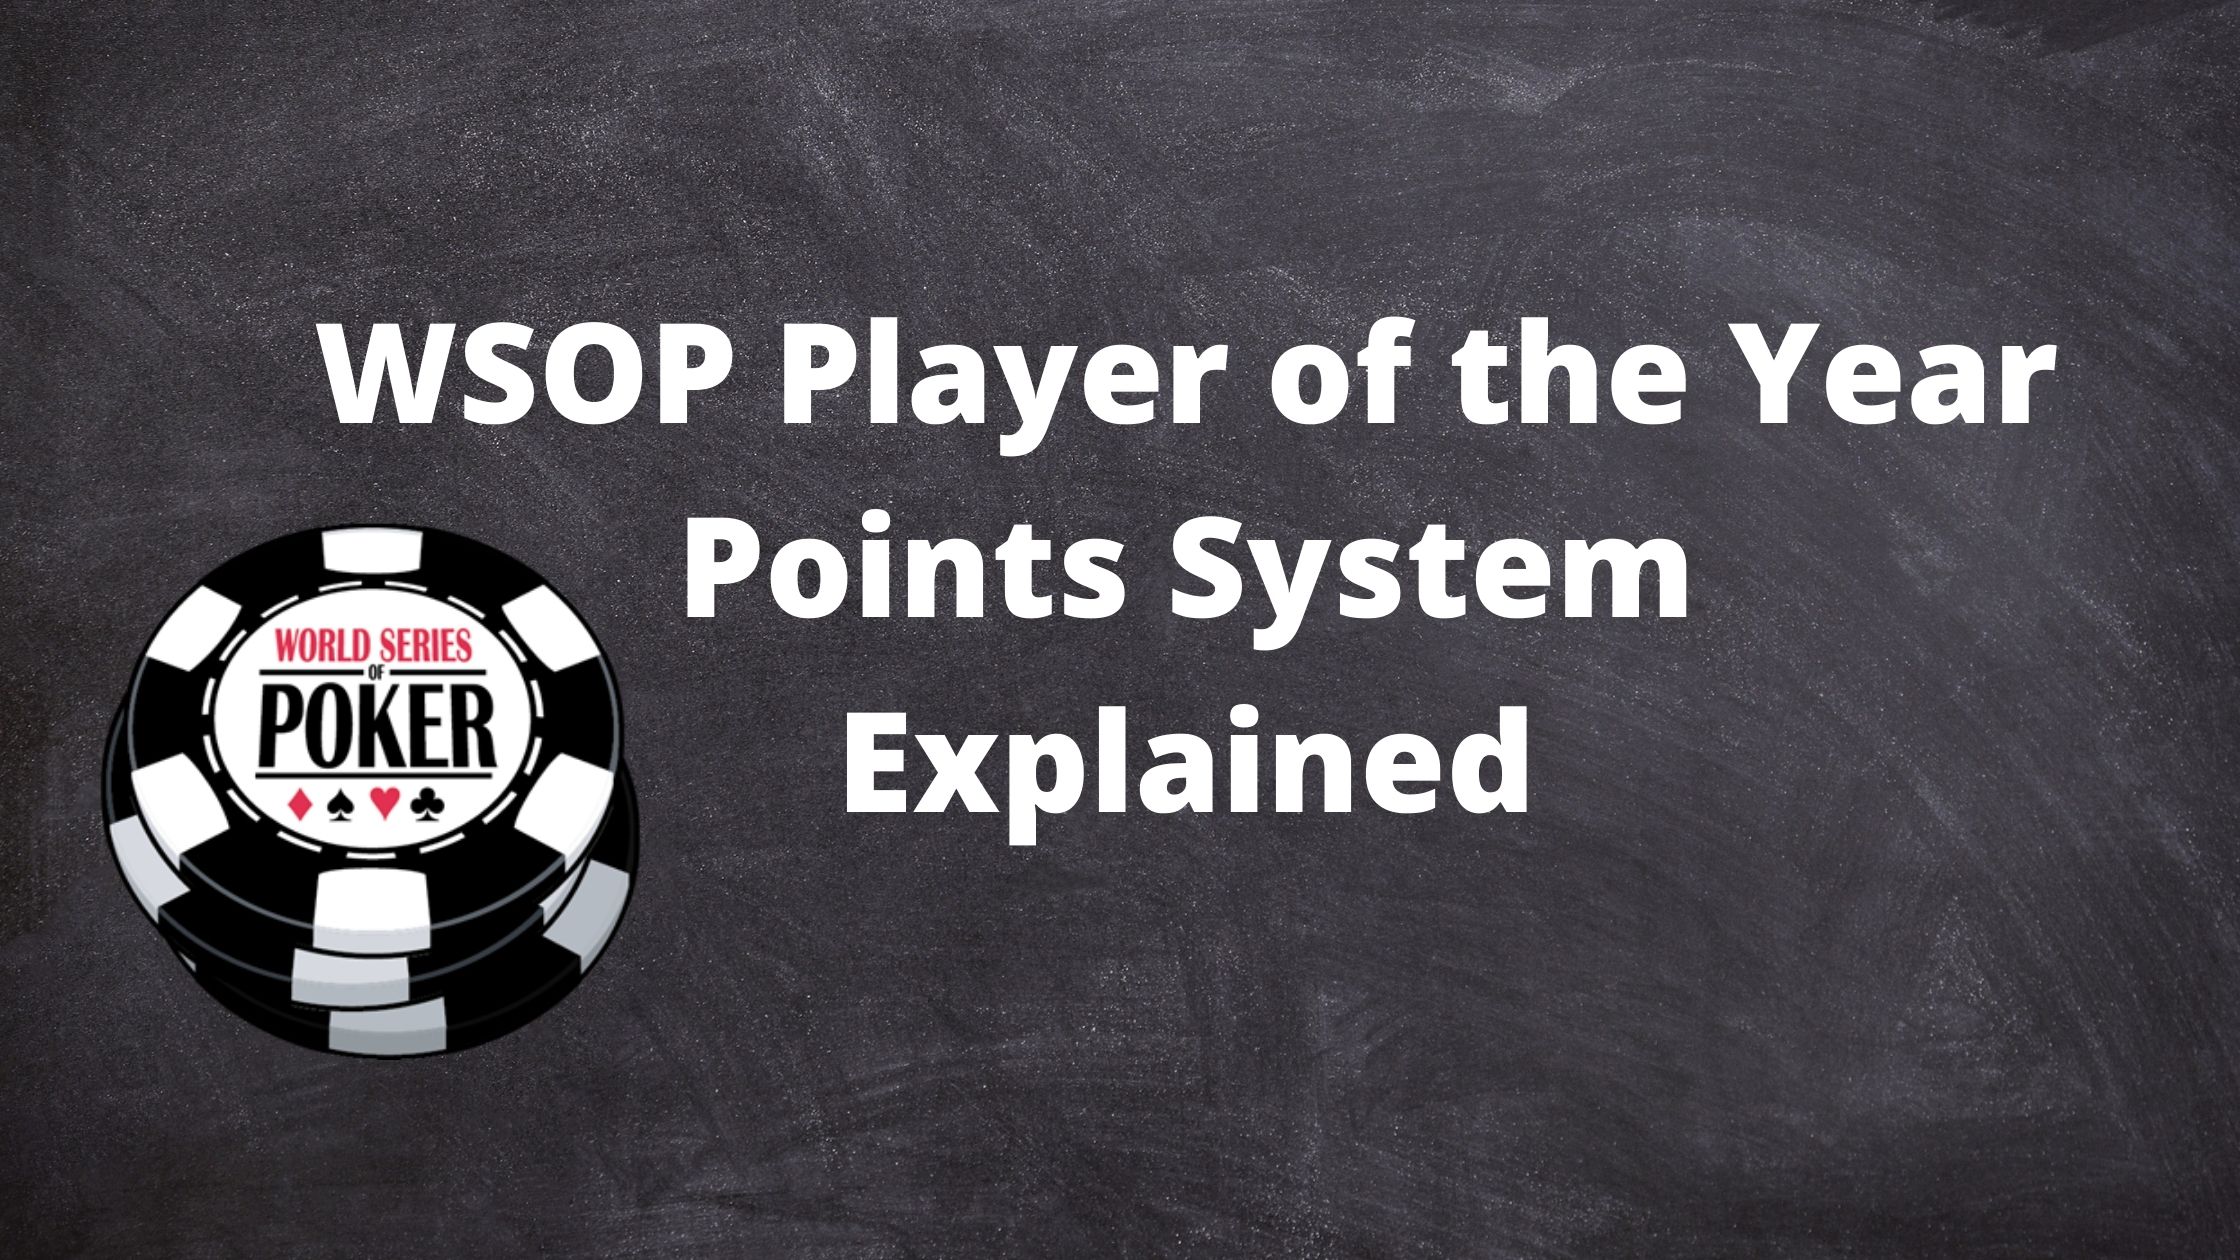 How Does The WSOP Player Of The Year Points System Work?